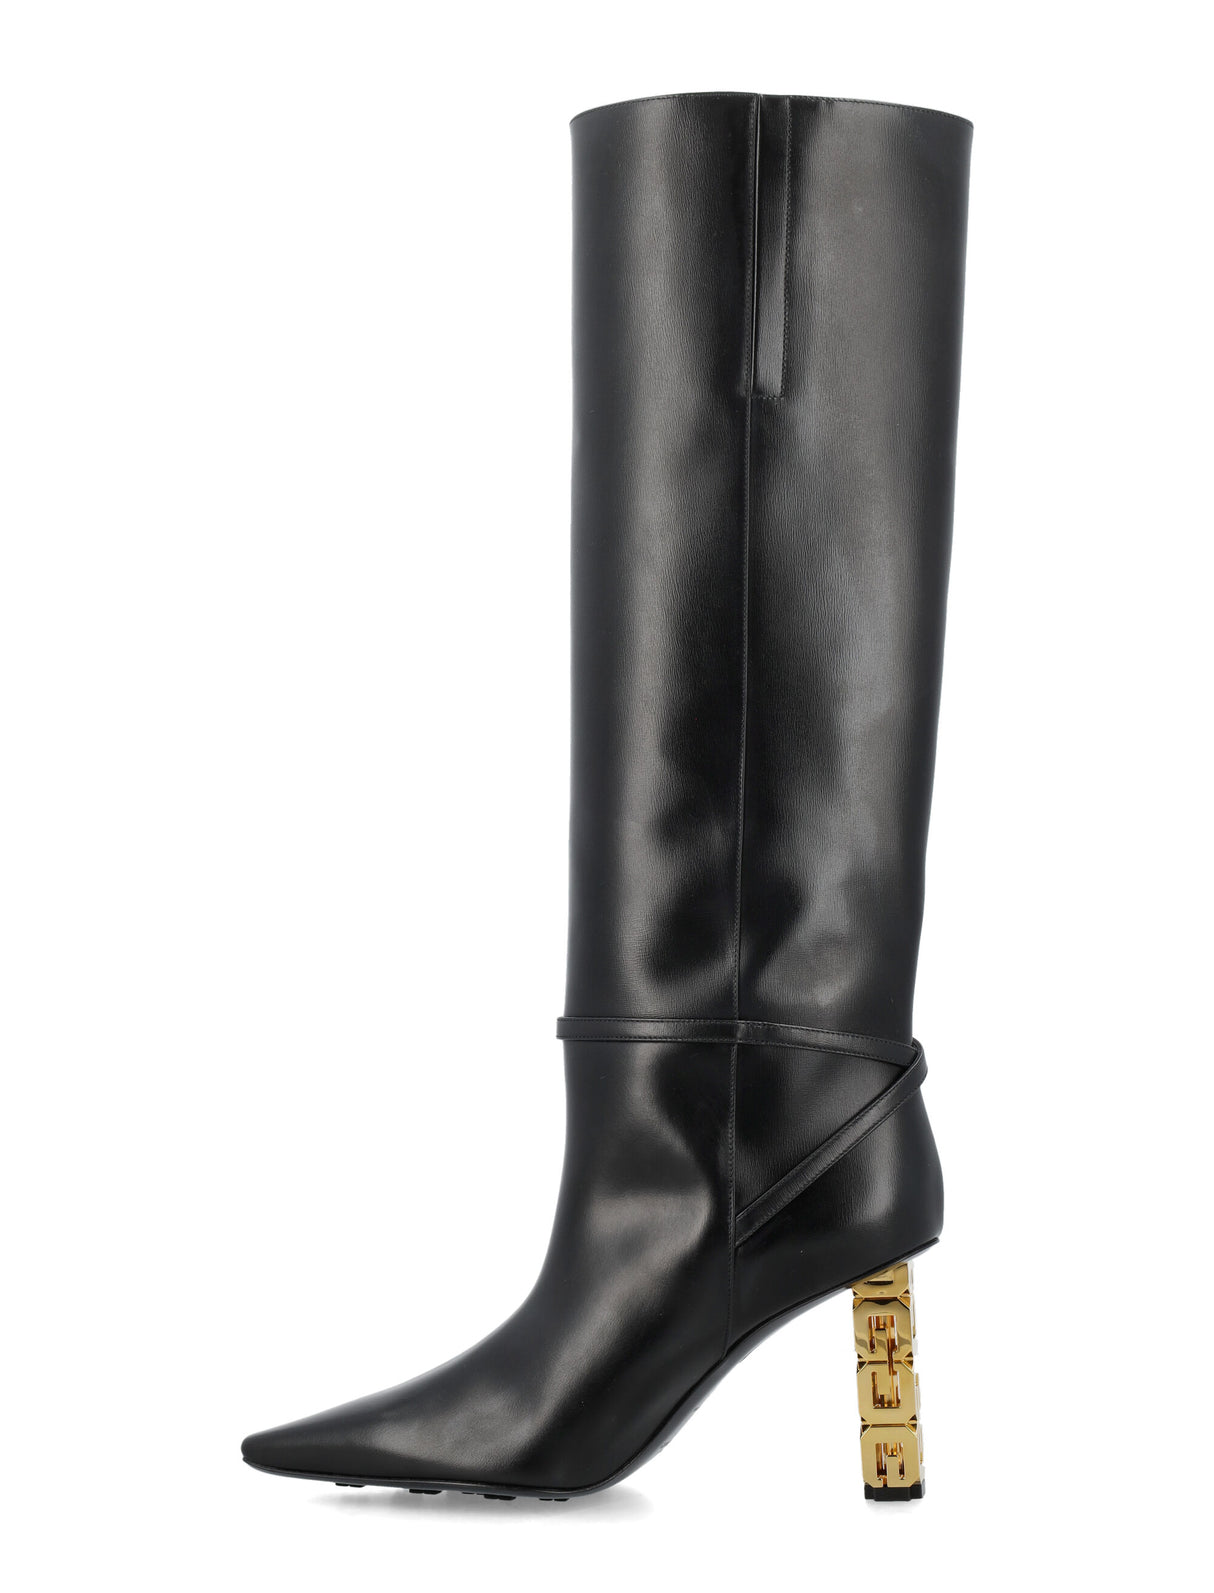 Black Leather High Boots with Gold G Logo